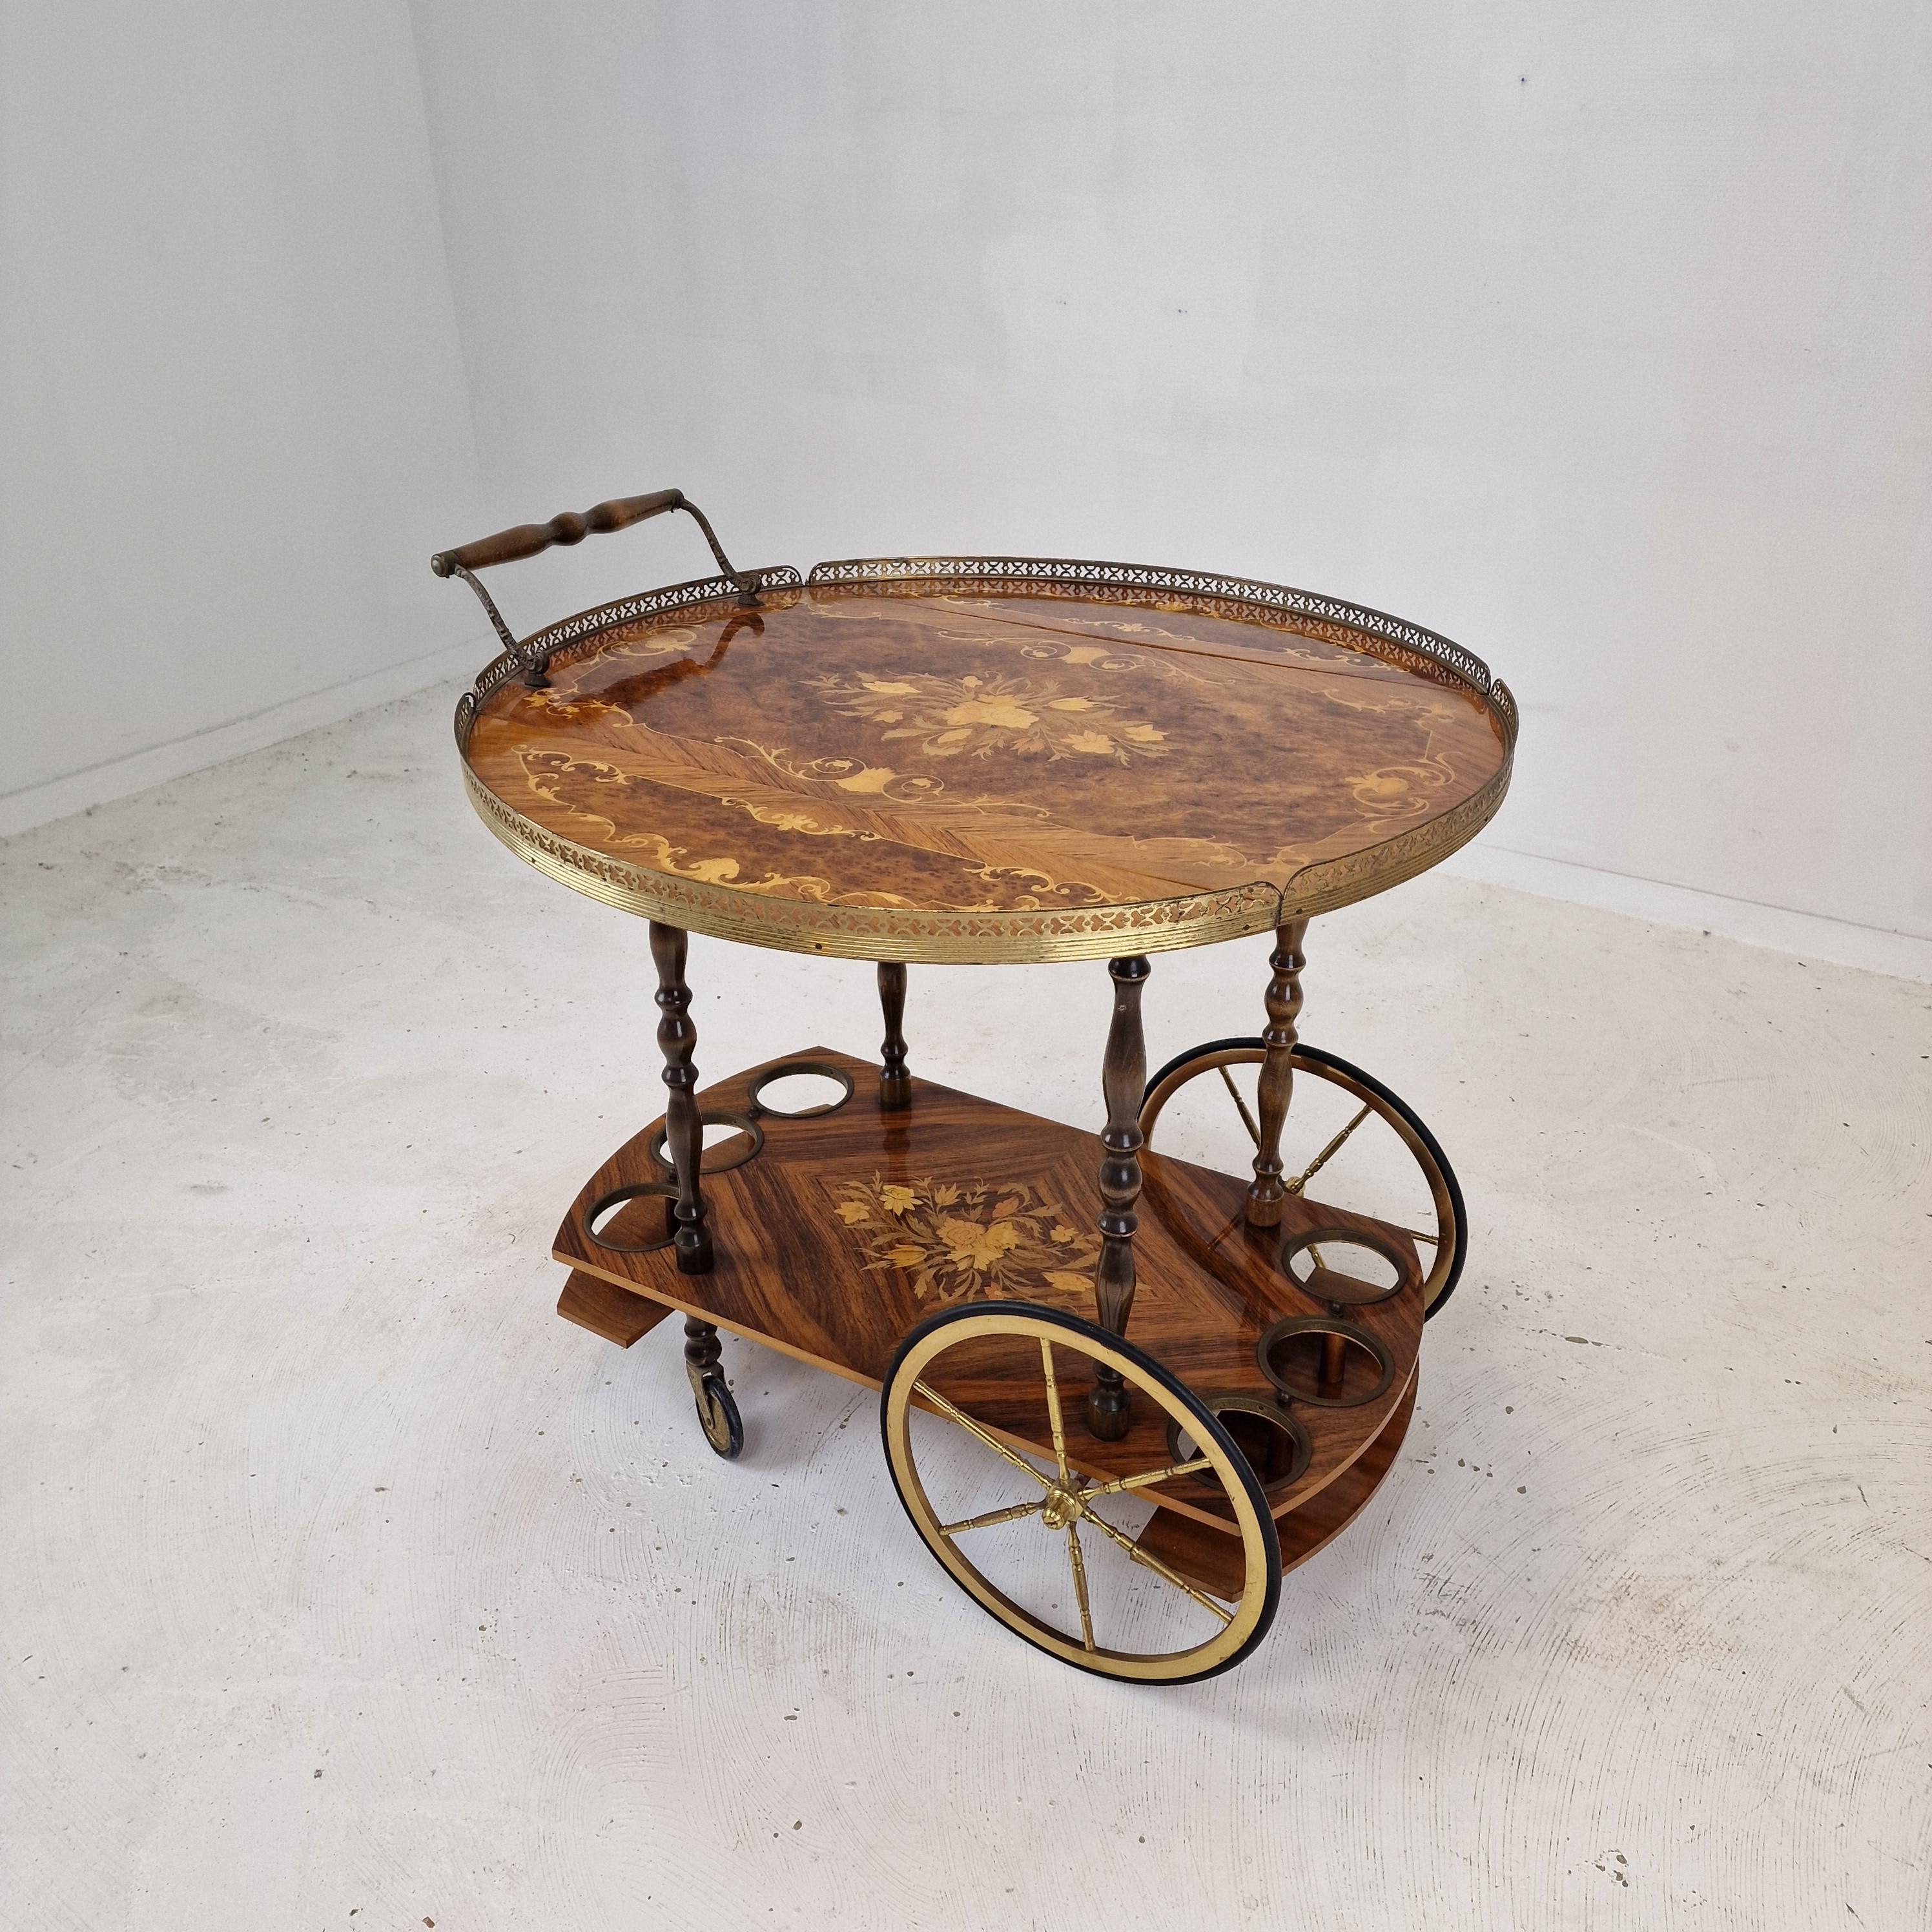 Beautiful wooden trolley or tea card, made in Italy in the beginning of 1900.

Rich and refined manual wooden inlays in the style of the Sorrento furniture with floral and fruity motifs.
Fabulous craftsmanship.

The table has the normal traces of